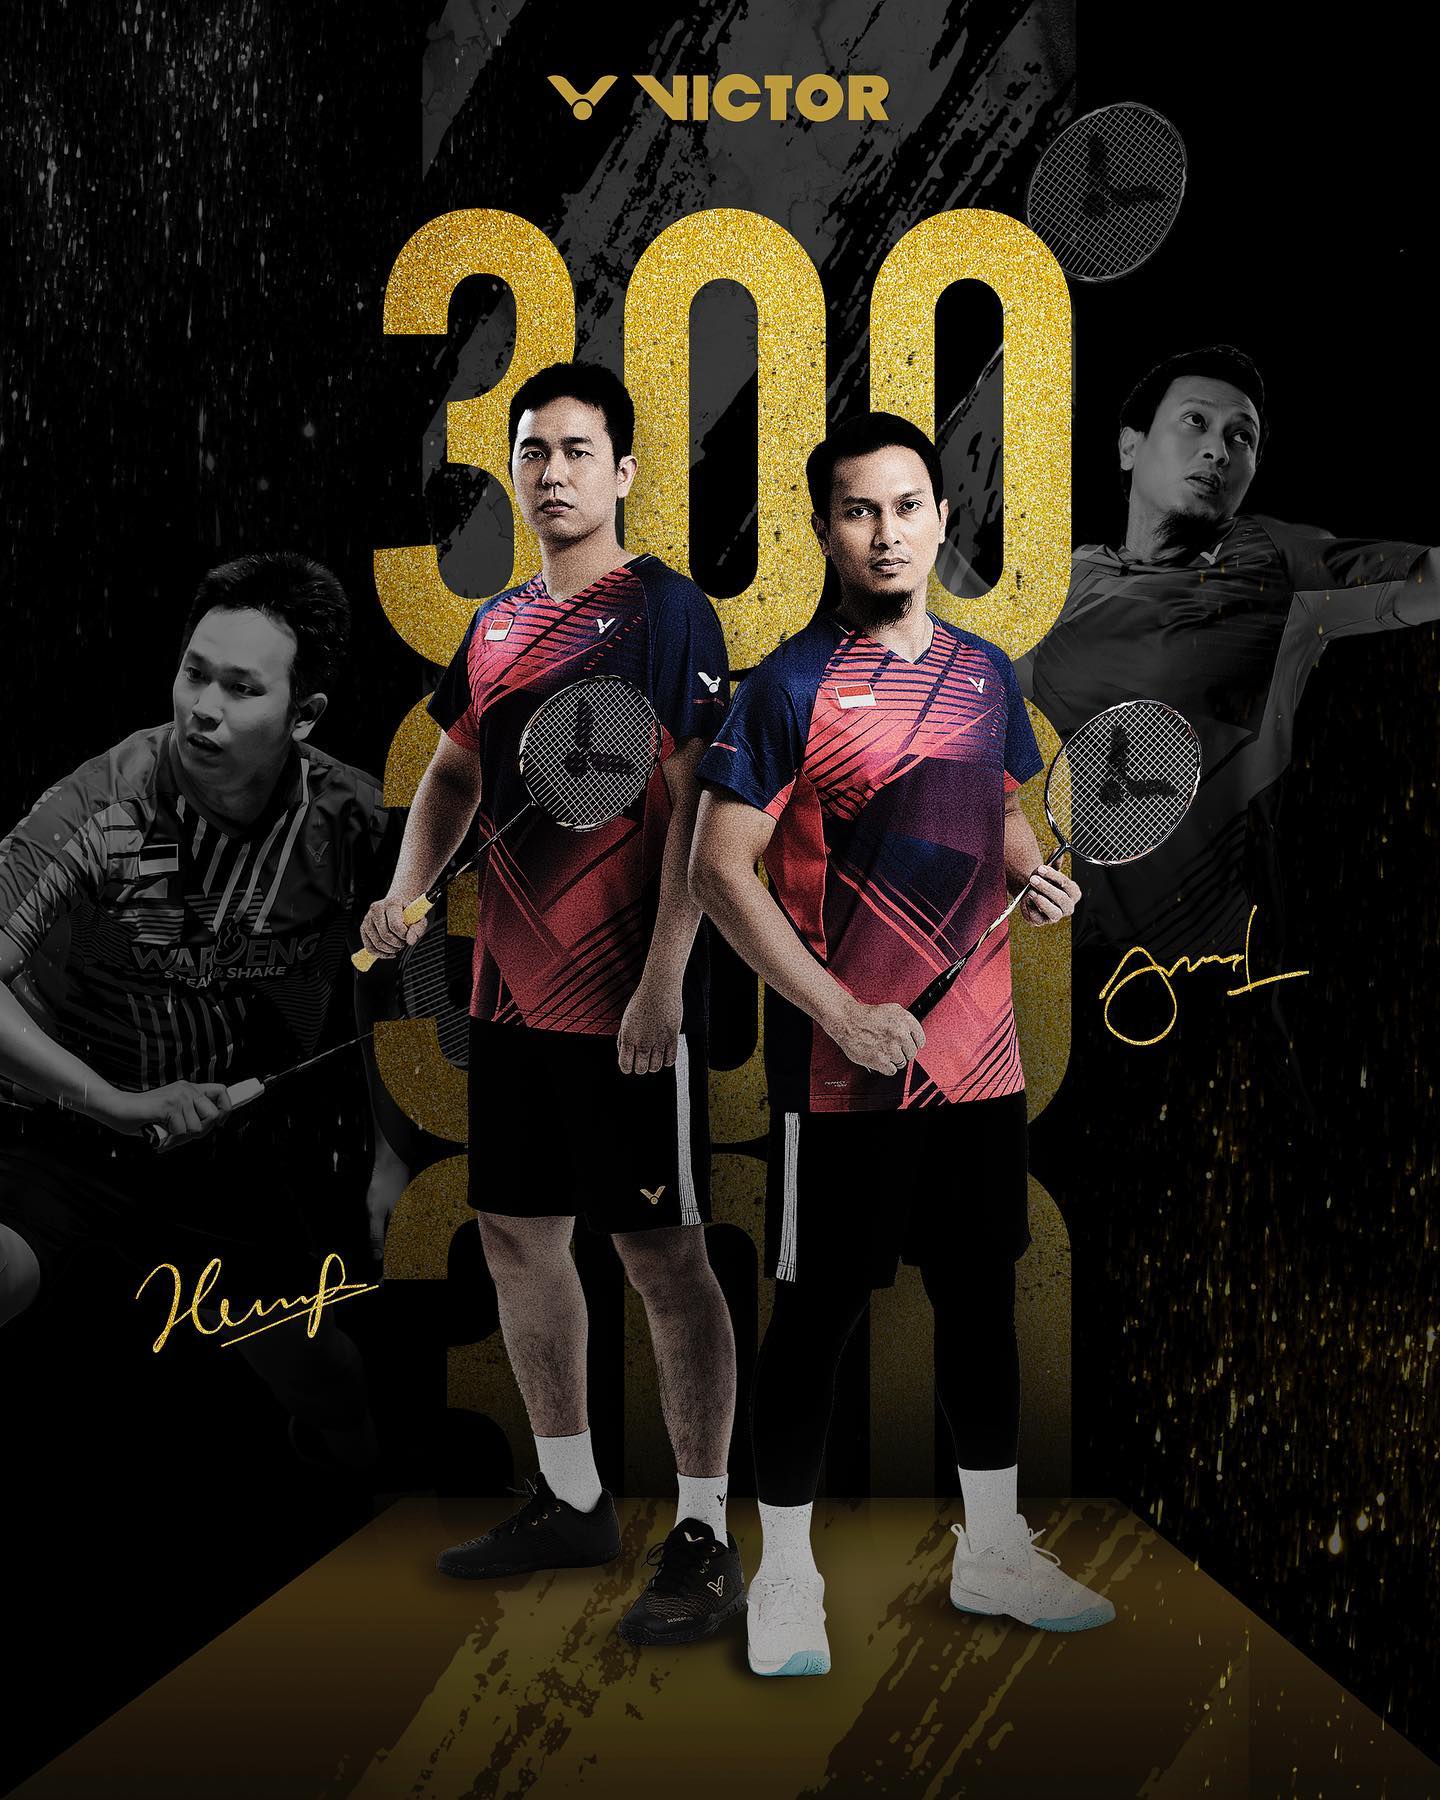 VICTOR SHOES VG-HS HENDRA SETIAWAN EDITION